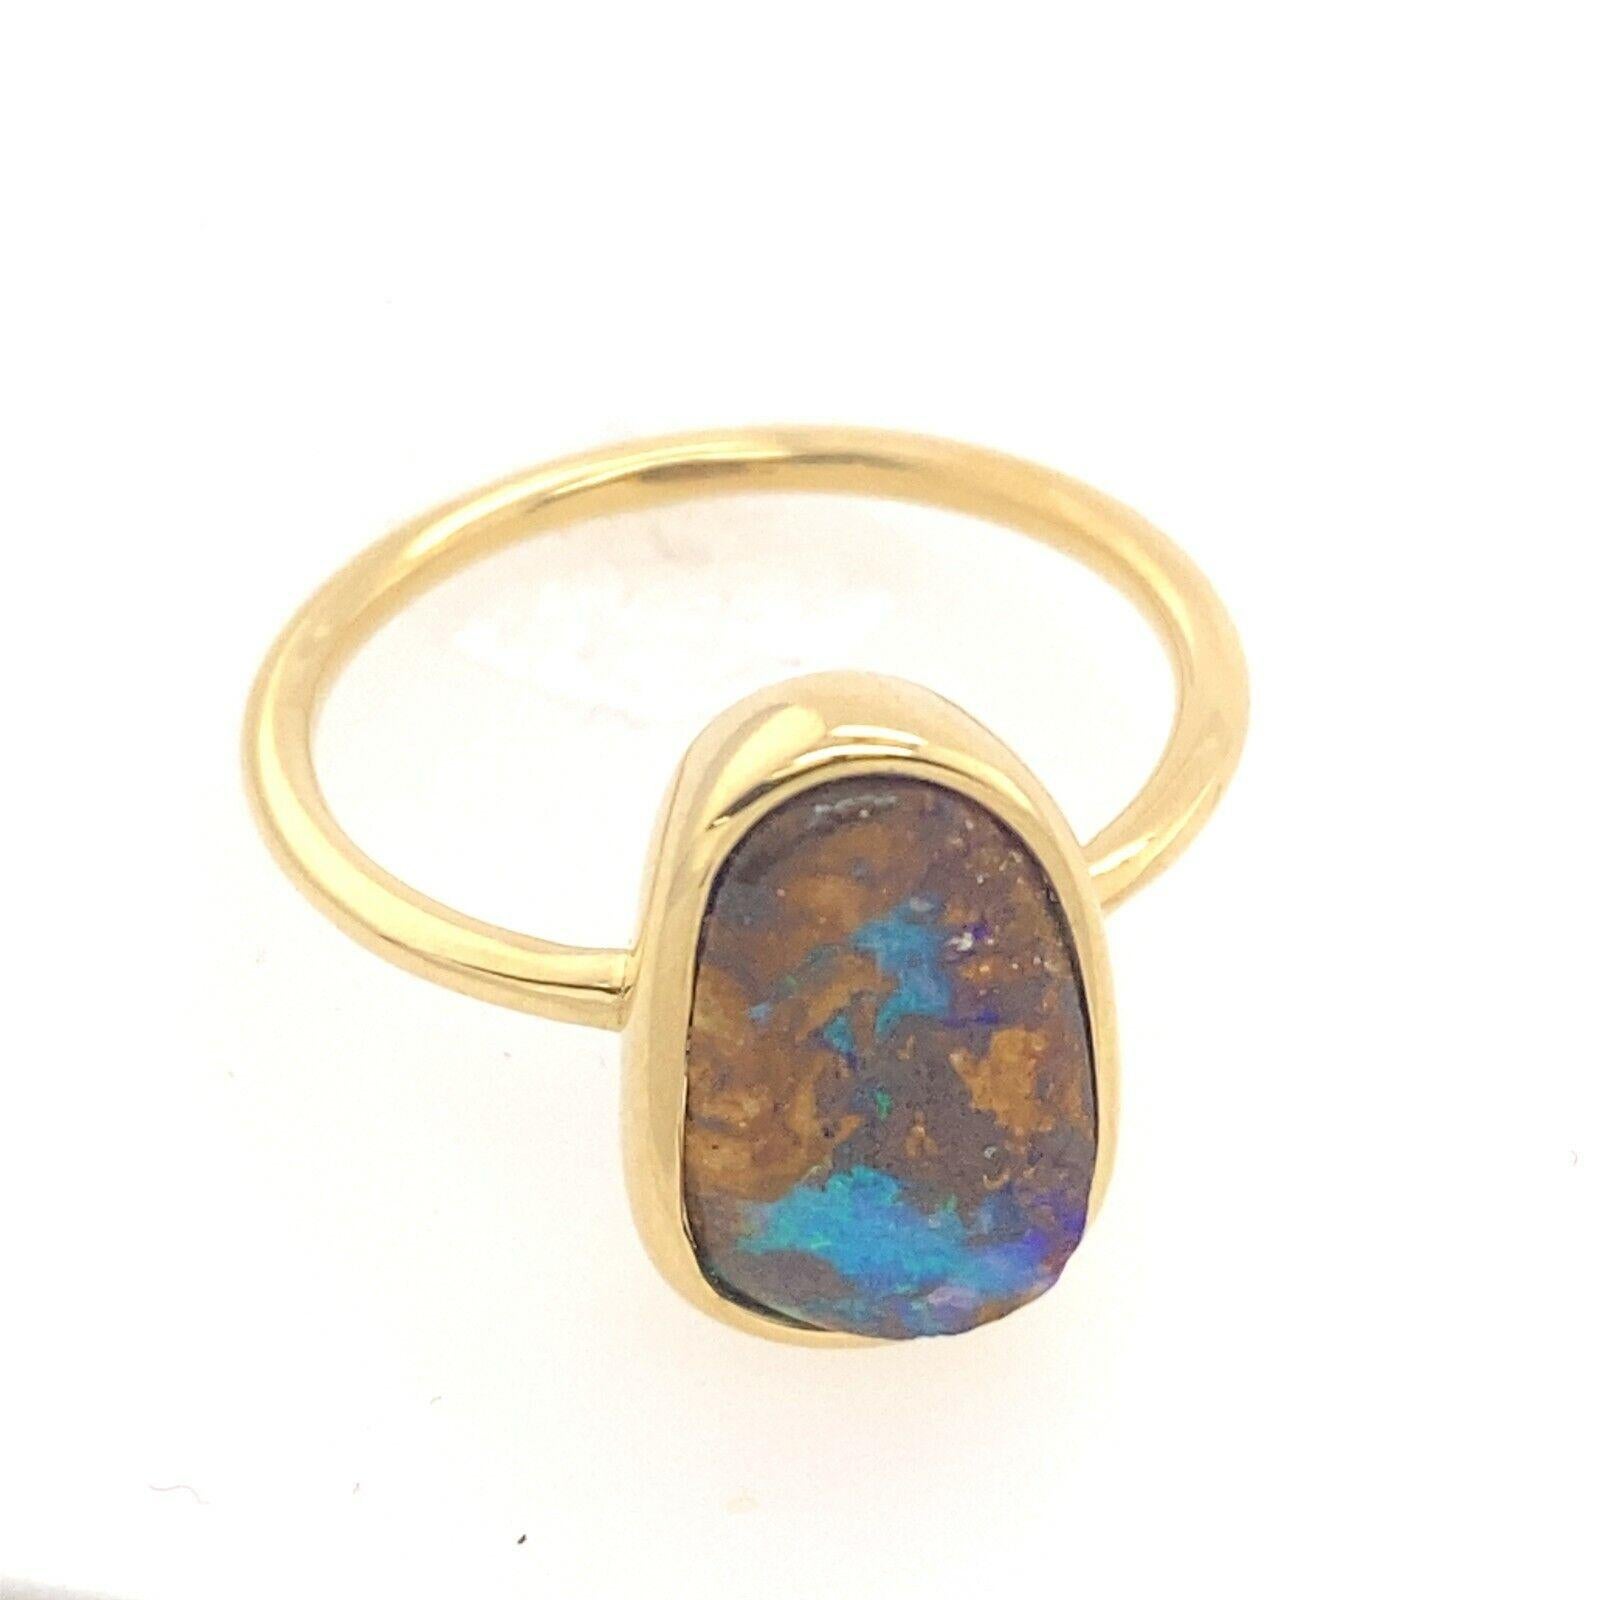 2.08ct Natural Multicolored Opal, Set in Rubover Setting, In 18ct Yellow Gold

Additional Information:
Total Opal Weight : 2.08ct
Width of Band : 1.44mm
Width of Head:9.2mm
Length of Head: 13.88mm
Total Weight: 3.3g
Ring Size: M1/2